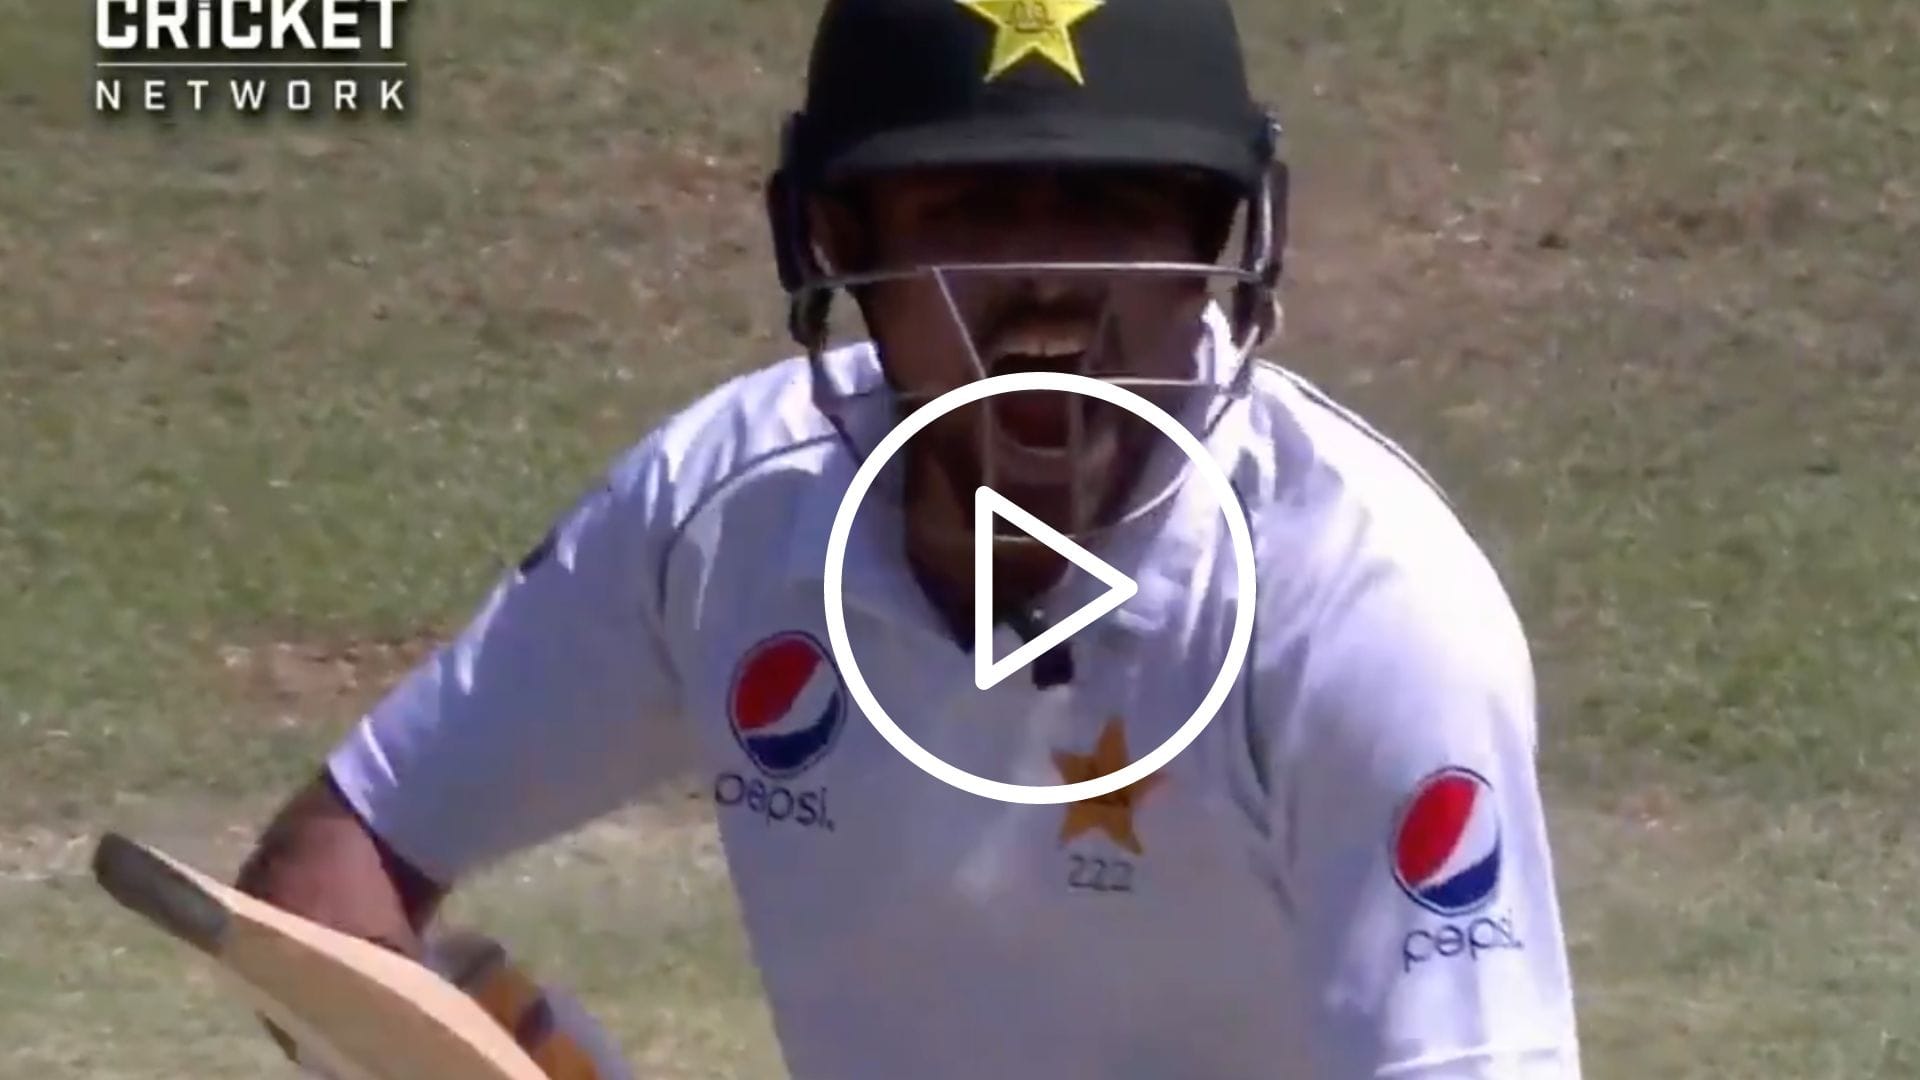 [Watch] When Babar Azam Celebrated 'Angrily' After Maiden Test Century In Australia